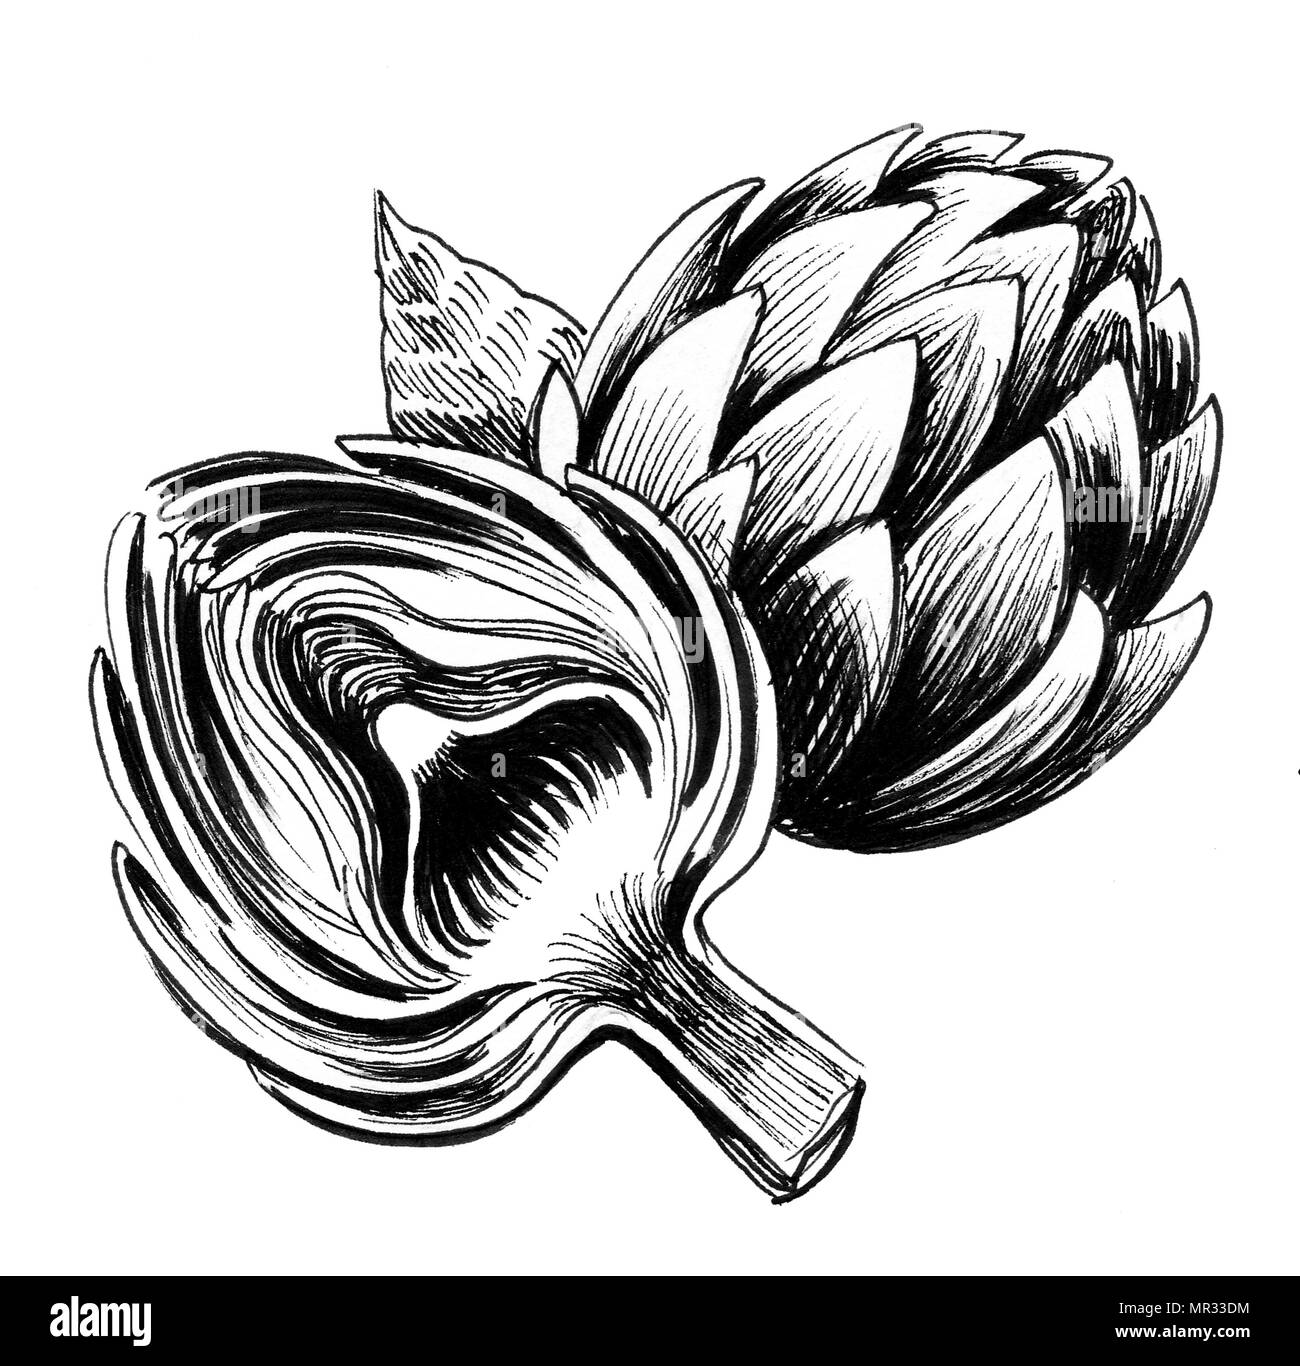 Artichokes. Ink black and white drawing Stock Photo - Alamy